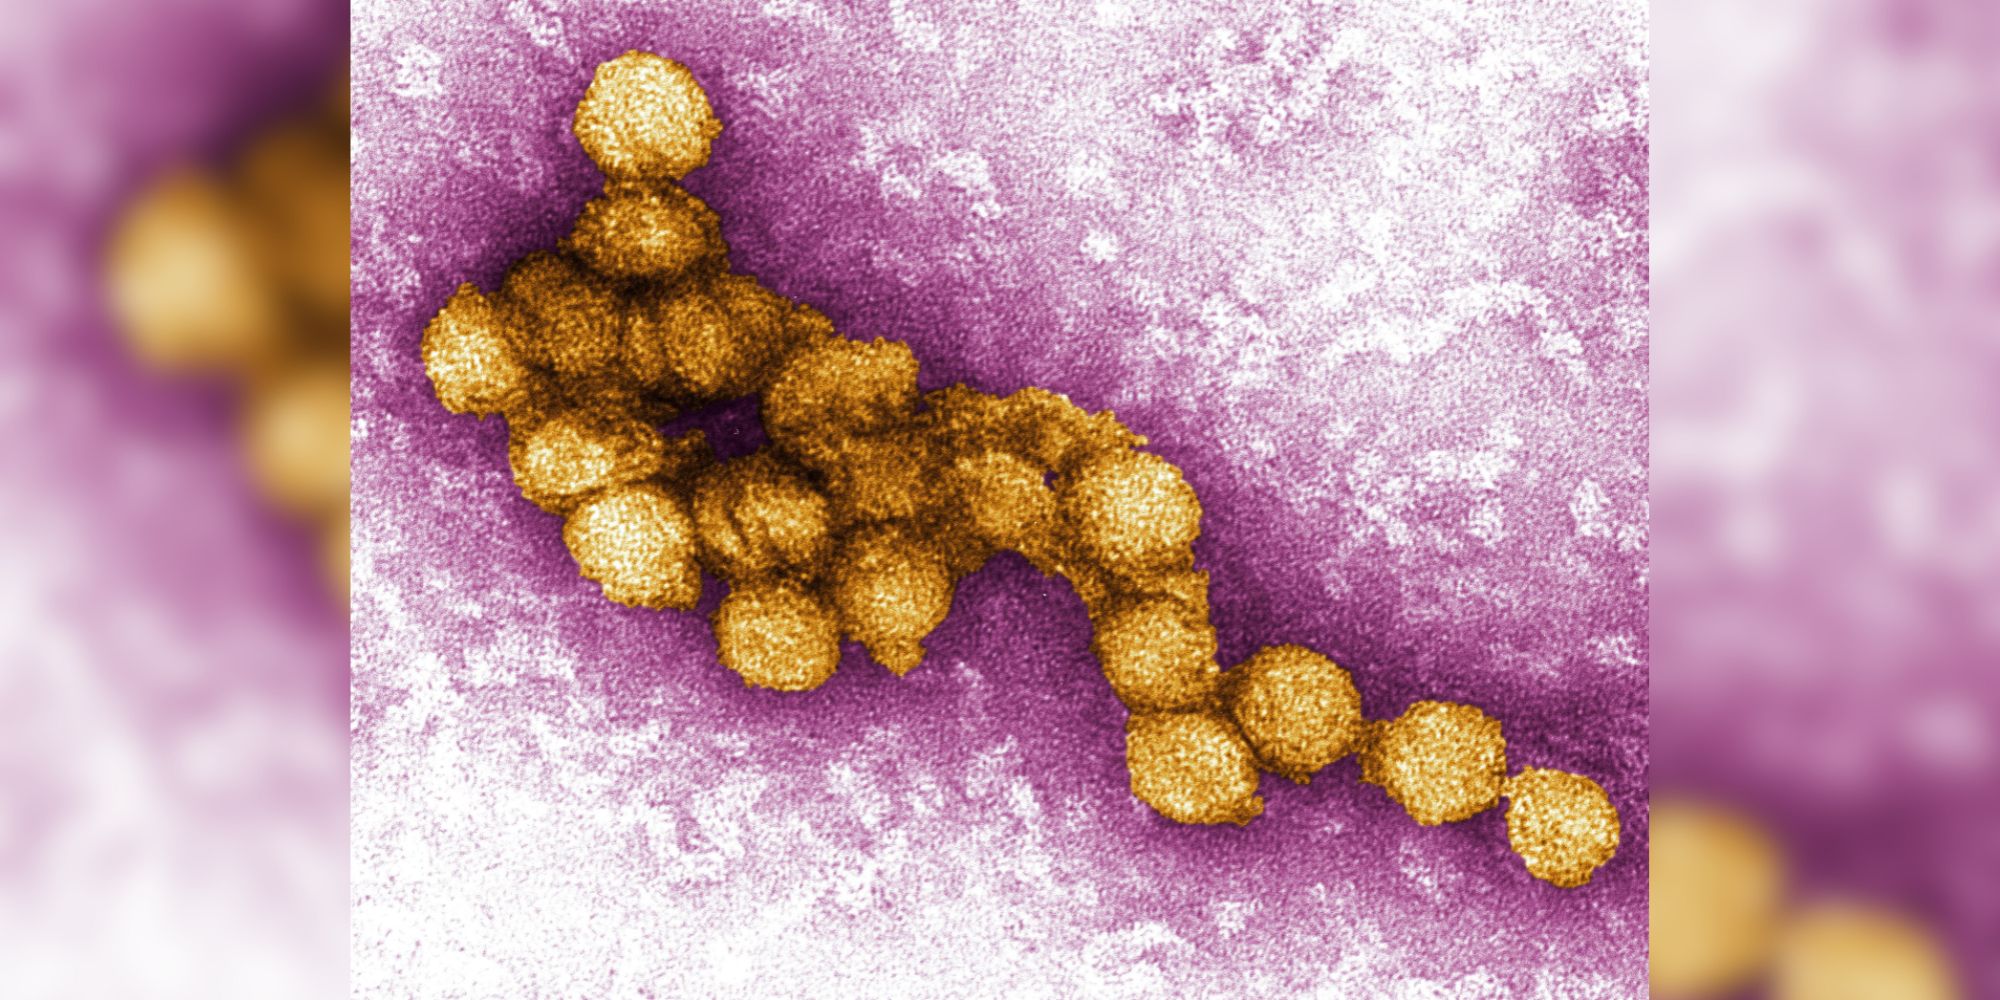 A micrograph of the West Nile Virus, appearing in yellow.